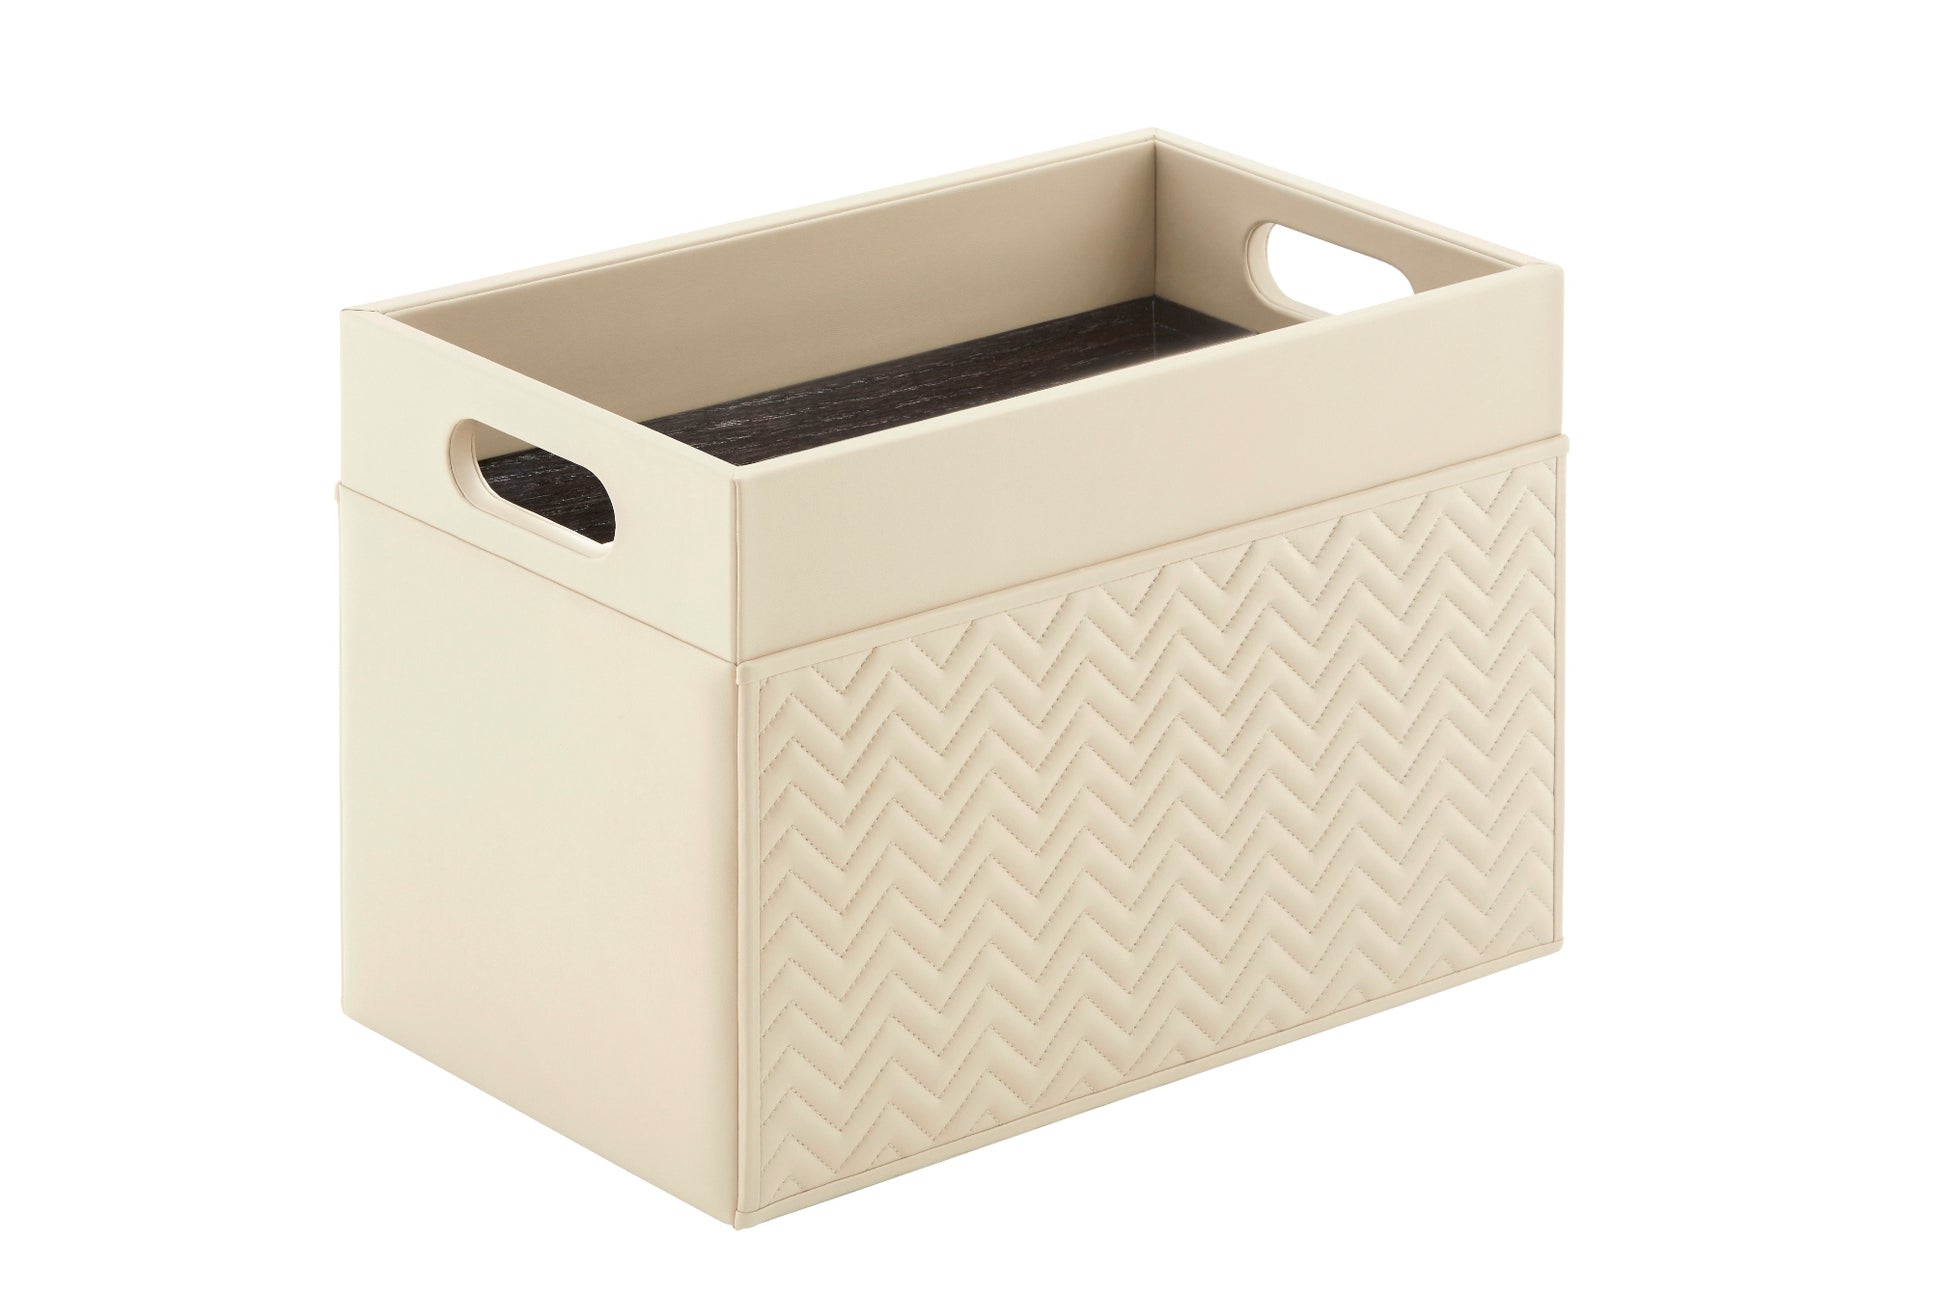 Emy Herringbone Magazine Holder by Riviere | Leather magazine holder with quilted herringbone leather on two sides and lining in varnished wood. It features a central divider. | Home Decor and Organization | 2Jour Concierge, your luxury lifestyle shop